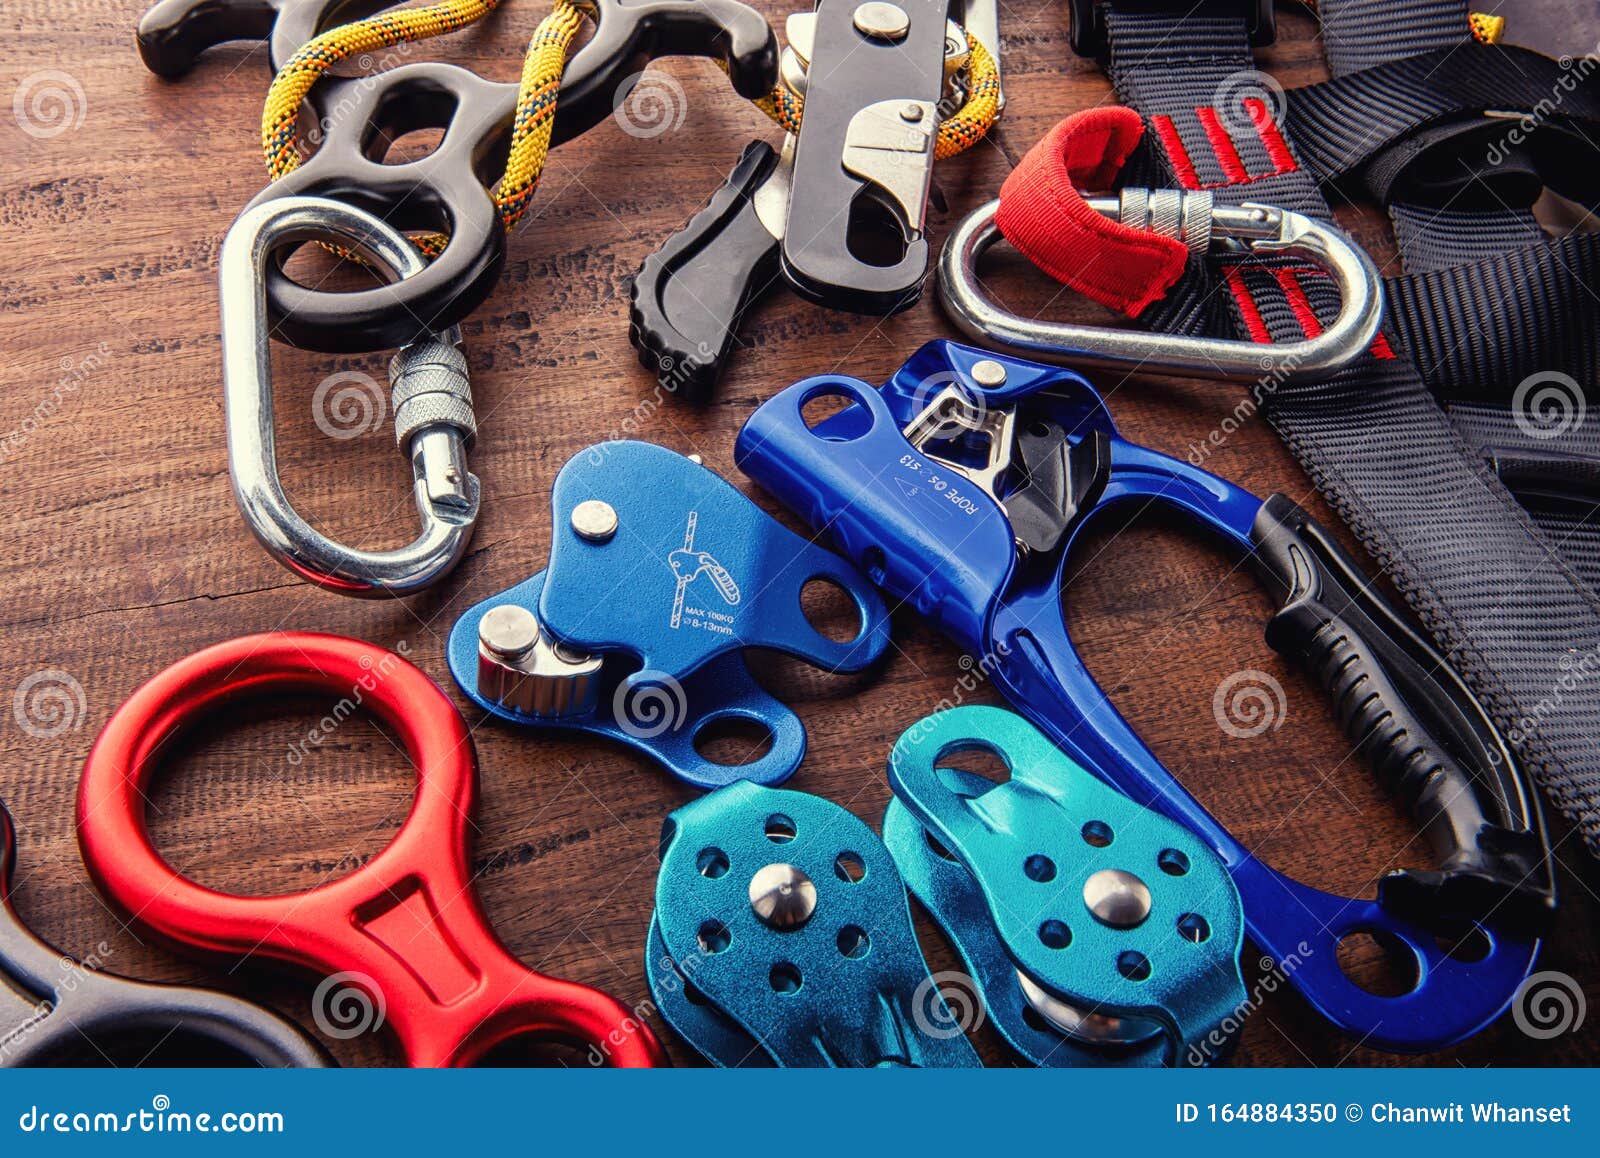 Climbing Equipment Outdoor for a Mountain Trip Stock Photo - Image of ...